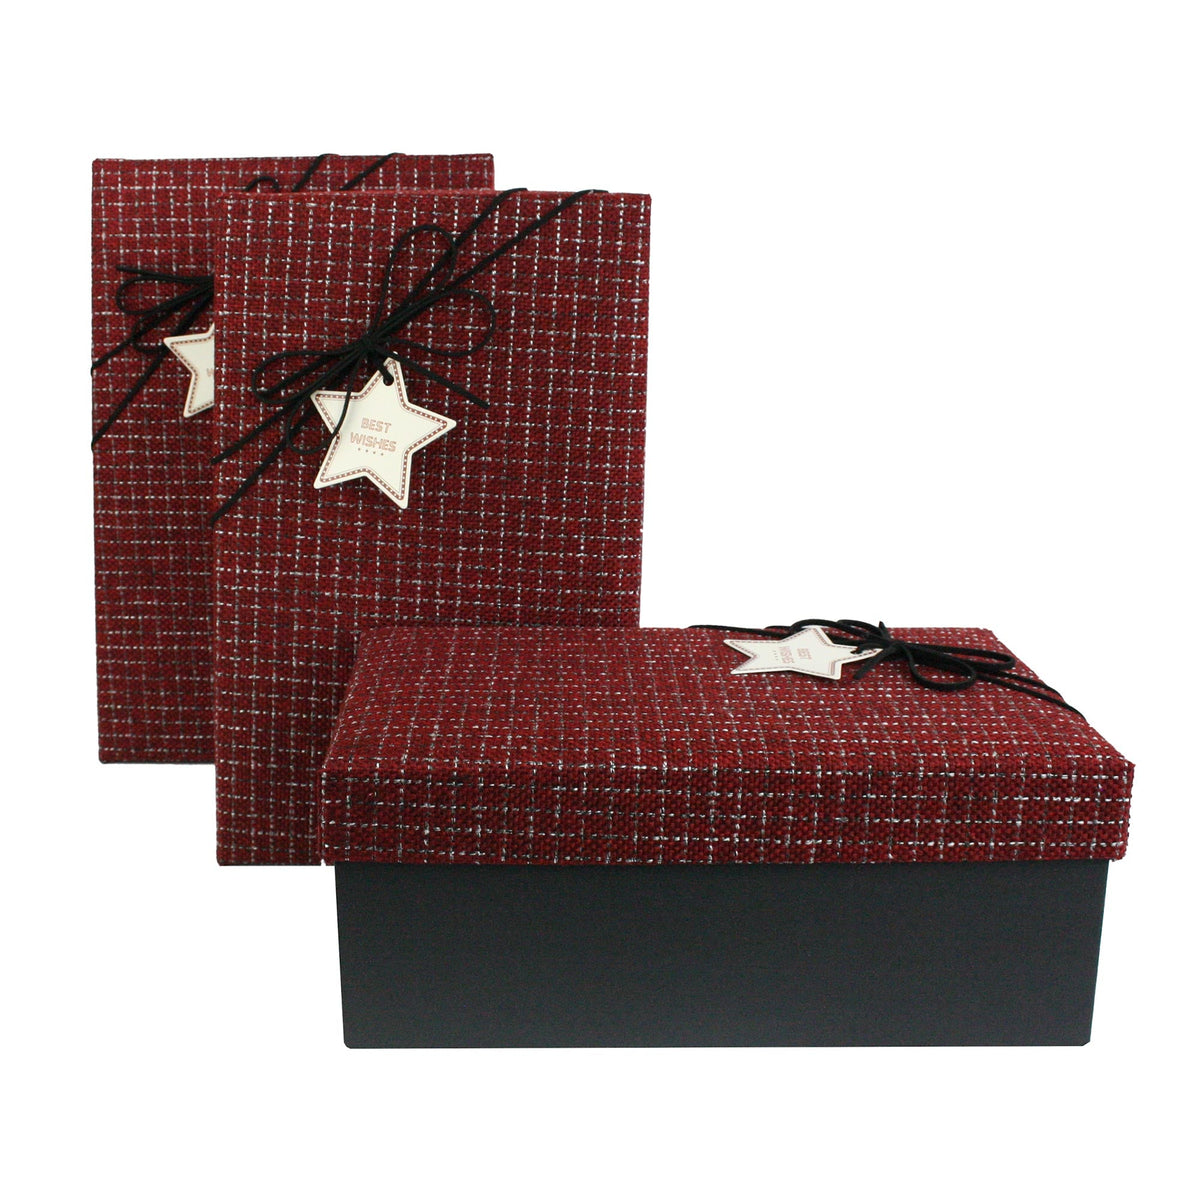 Luxury Textured Red/Black Gift Boxes - Set of 3